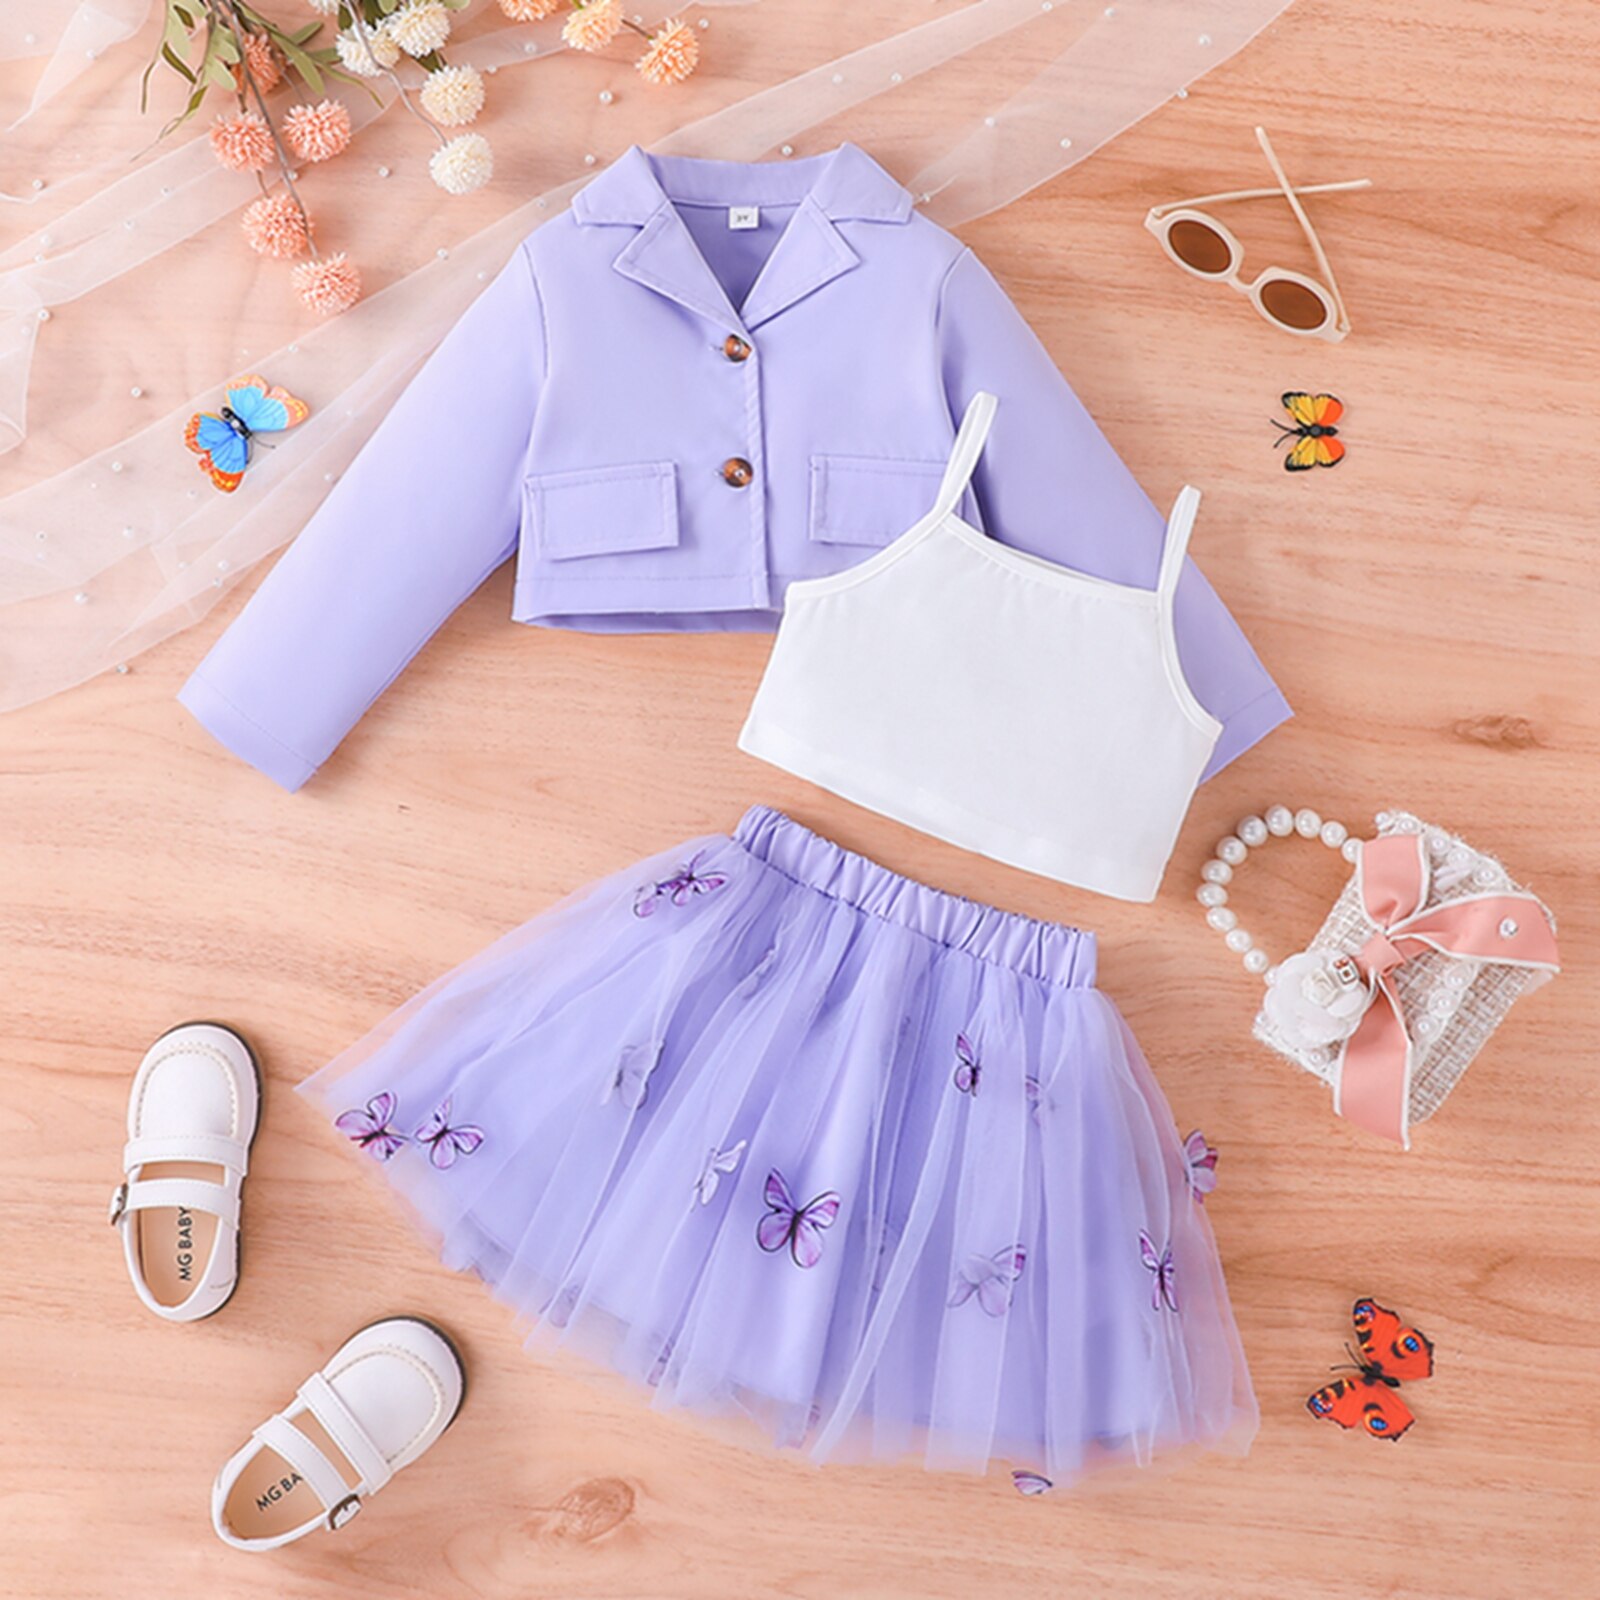 Pudcoco-Kids-Girl-3-Piece-Outfit-Sleeveless-Camisole-and-Butterfly-Print-Tulle-Skirt-Long-Sleeve-Button-1